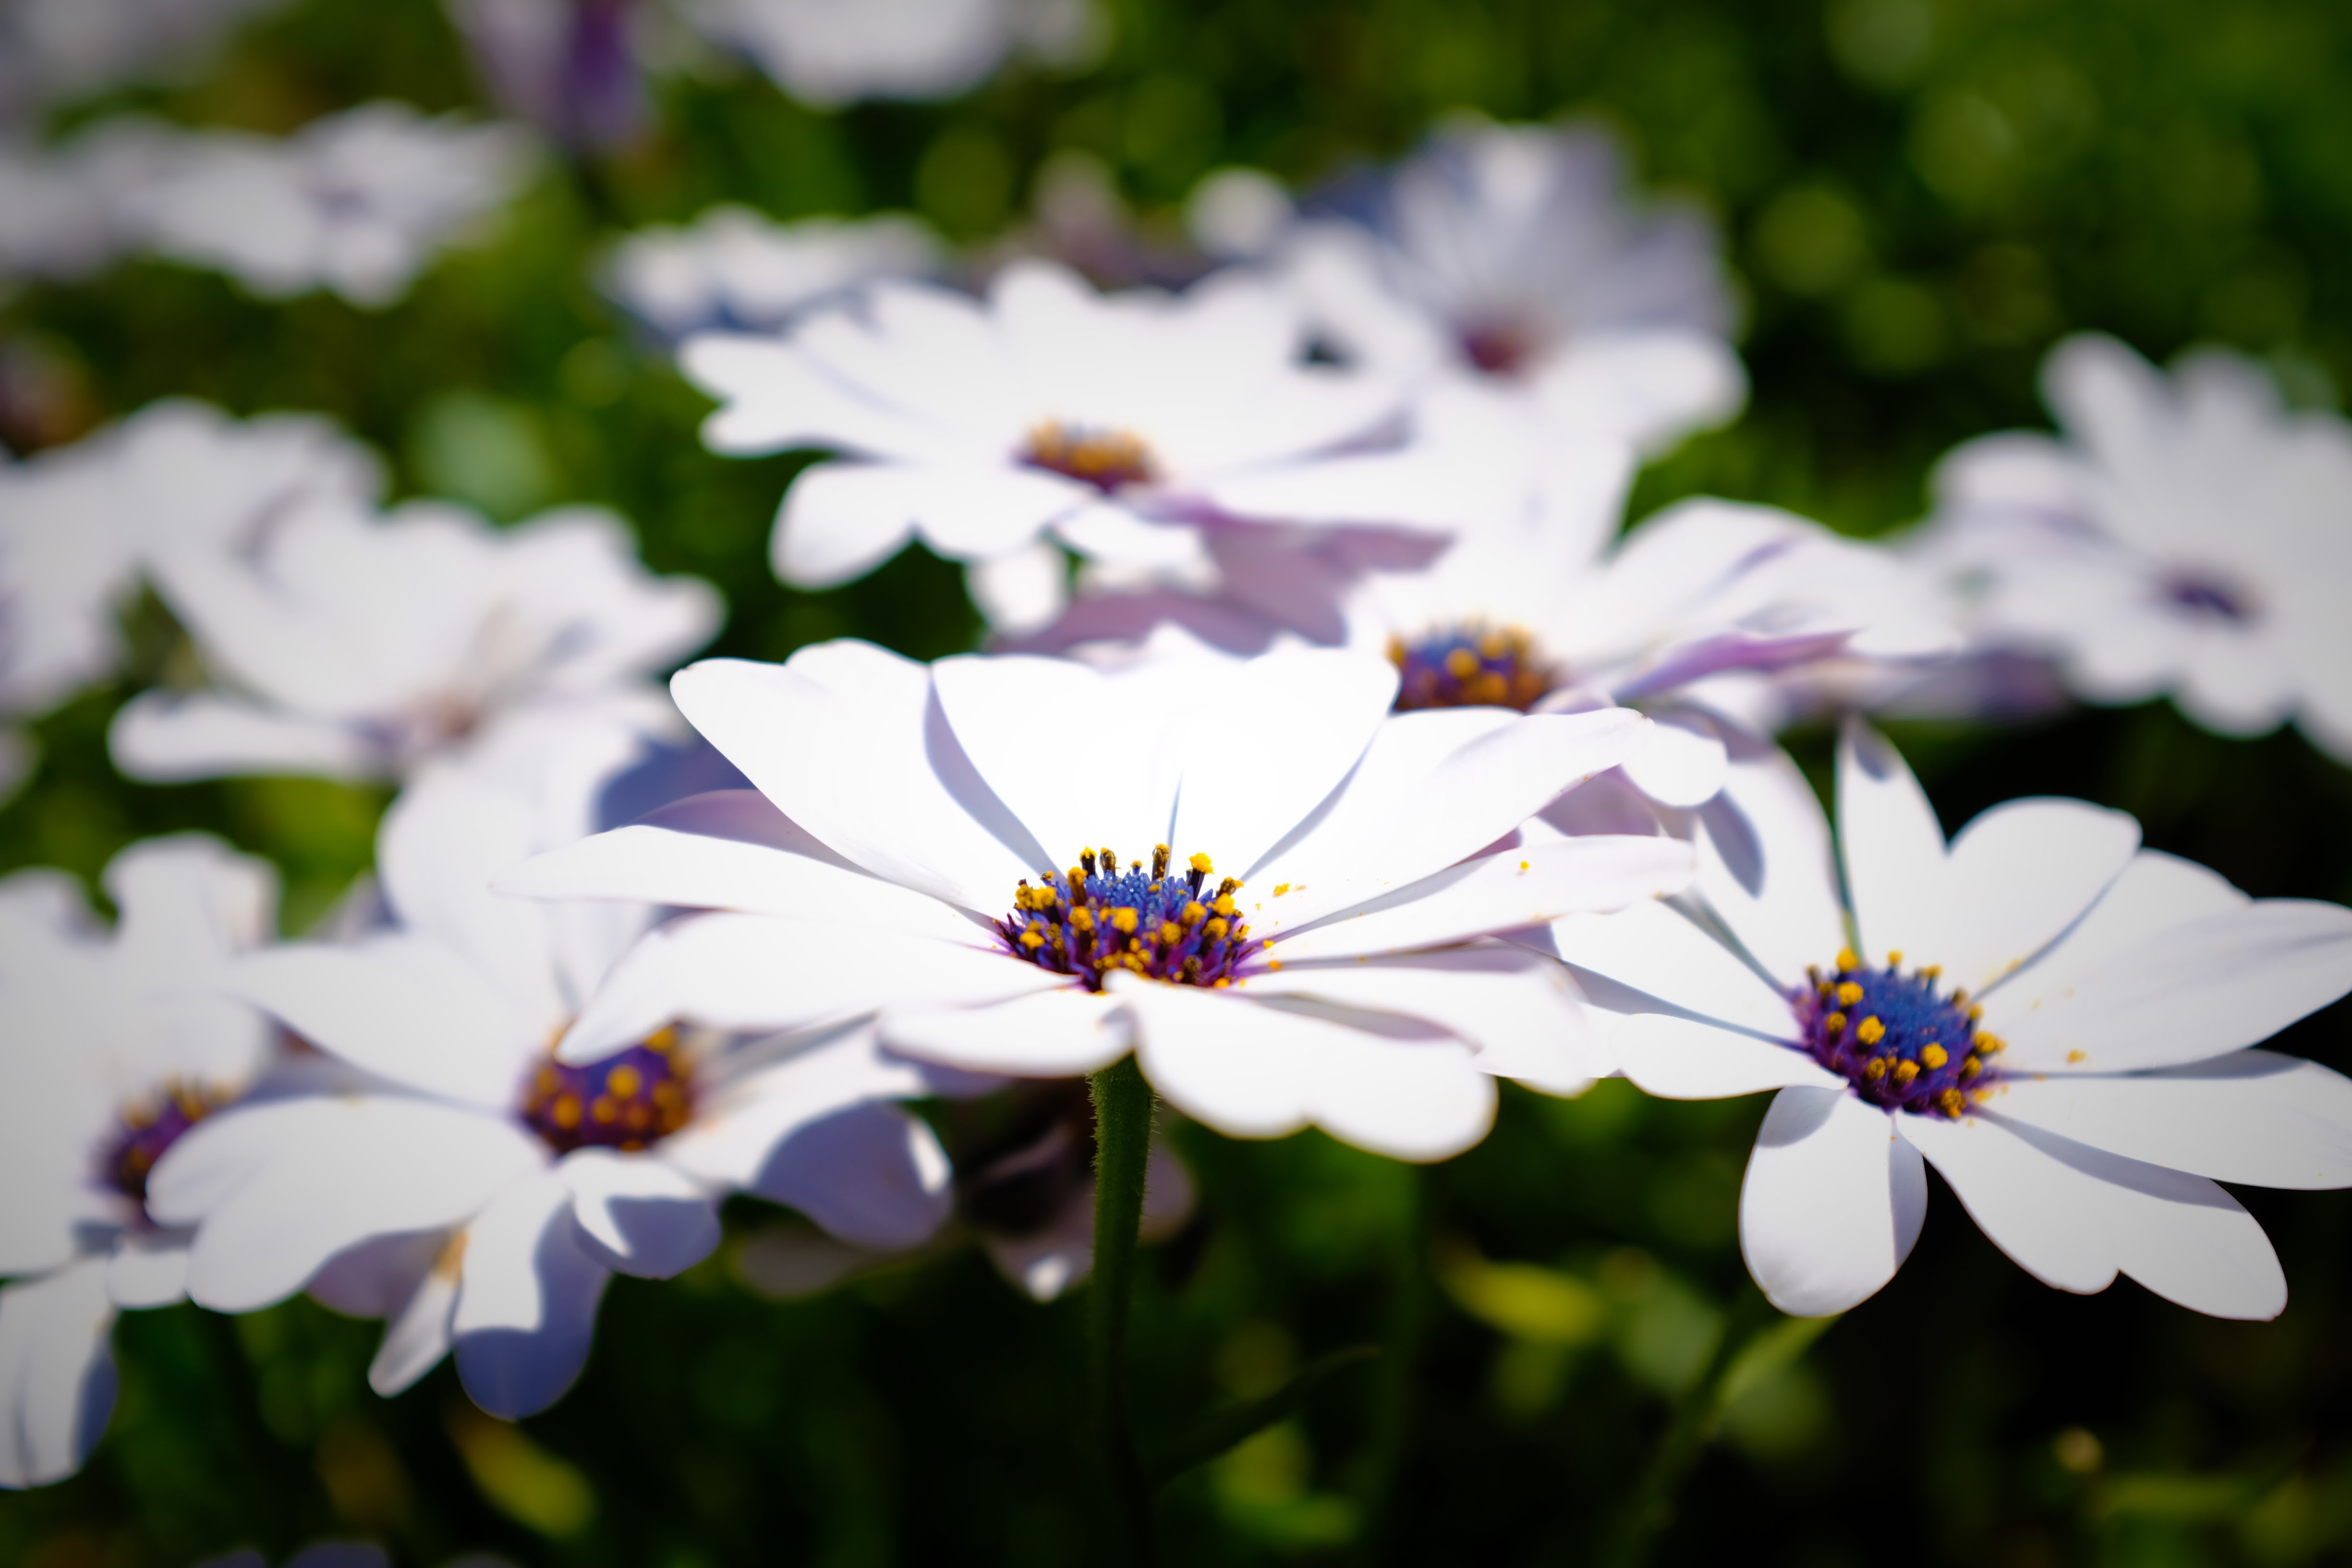 White flowers with blue and yellow centers - Arboretum